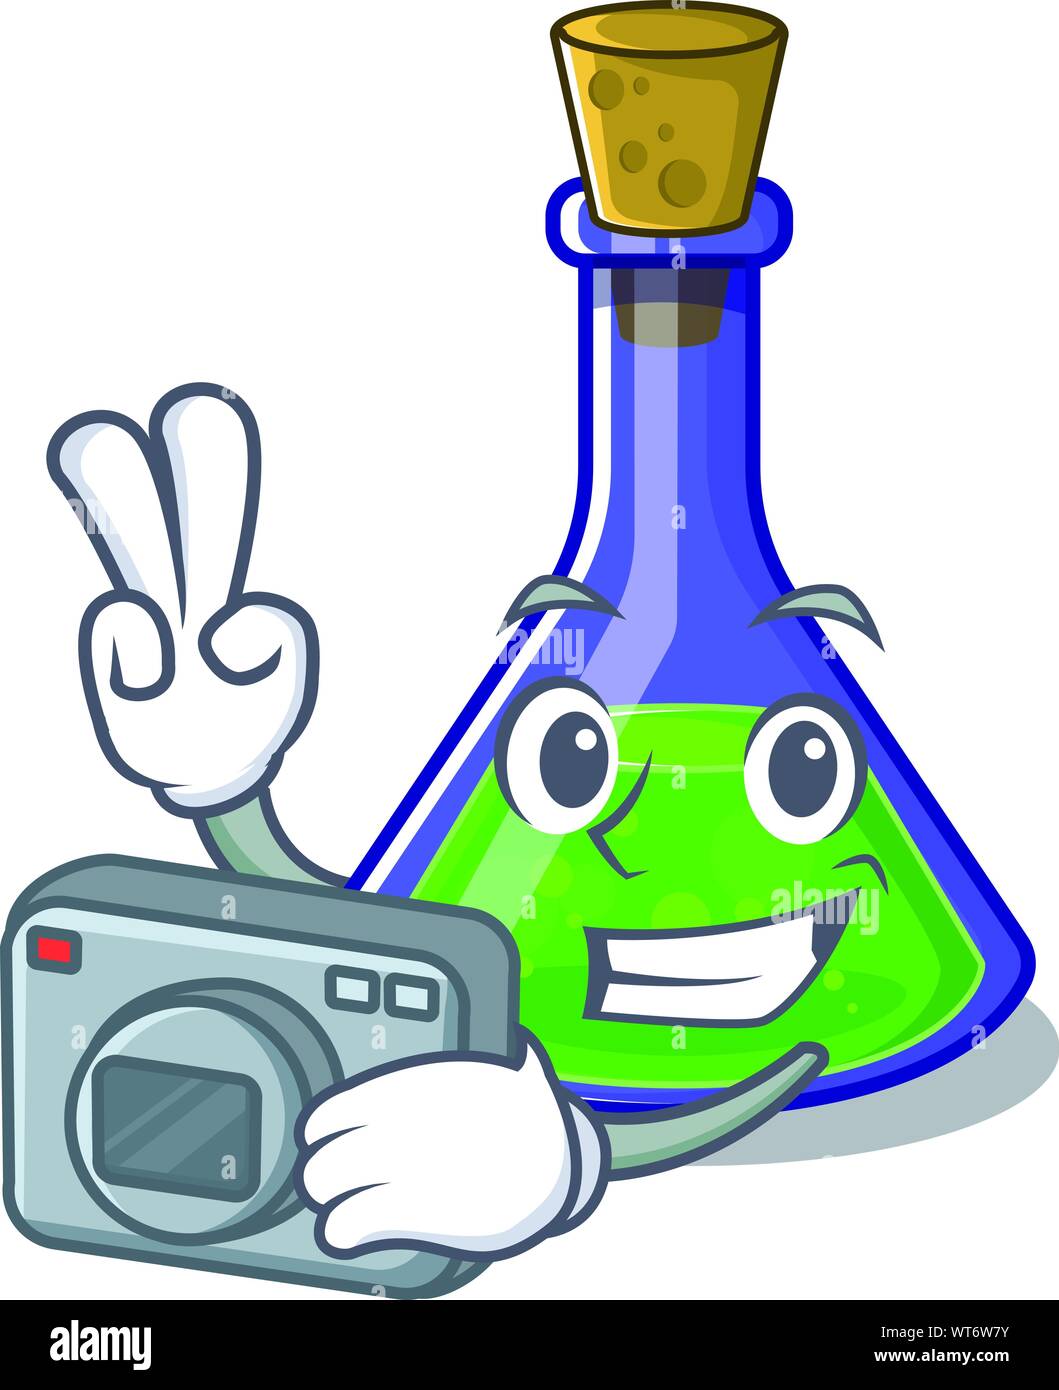 Photographer magic potion cartoon shaped in character vector illustration Stock Vector